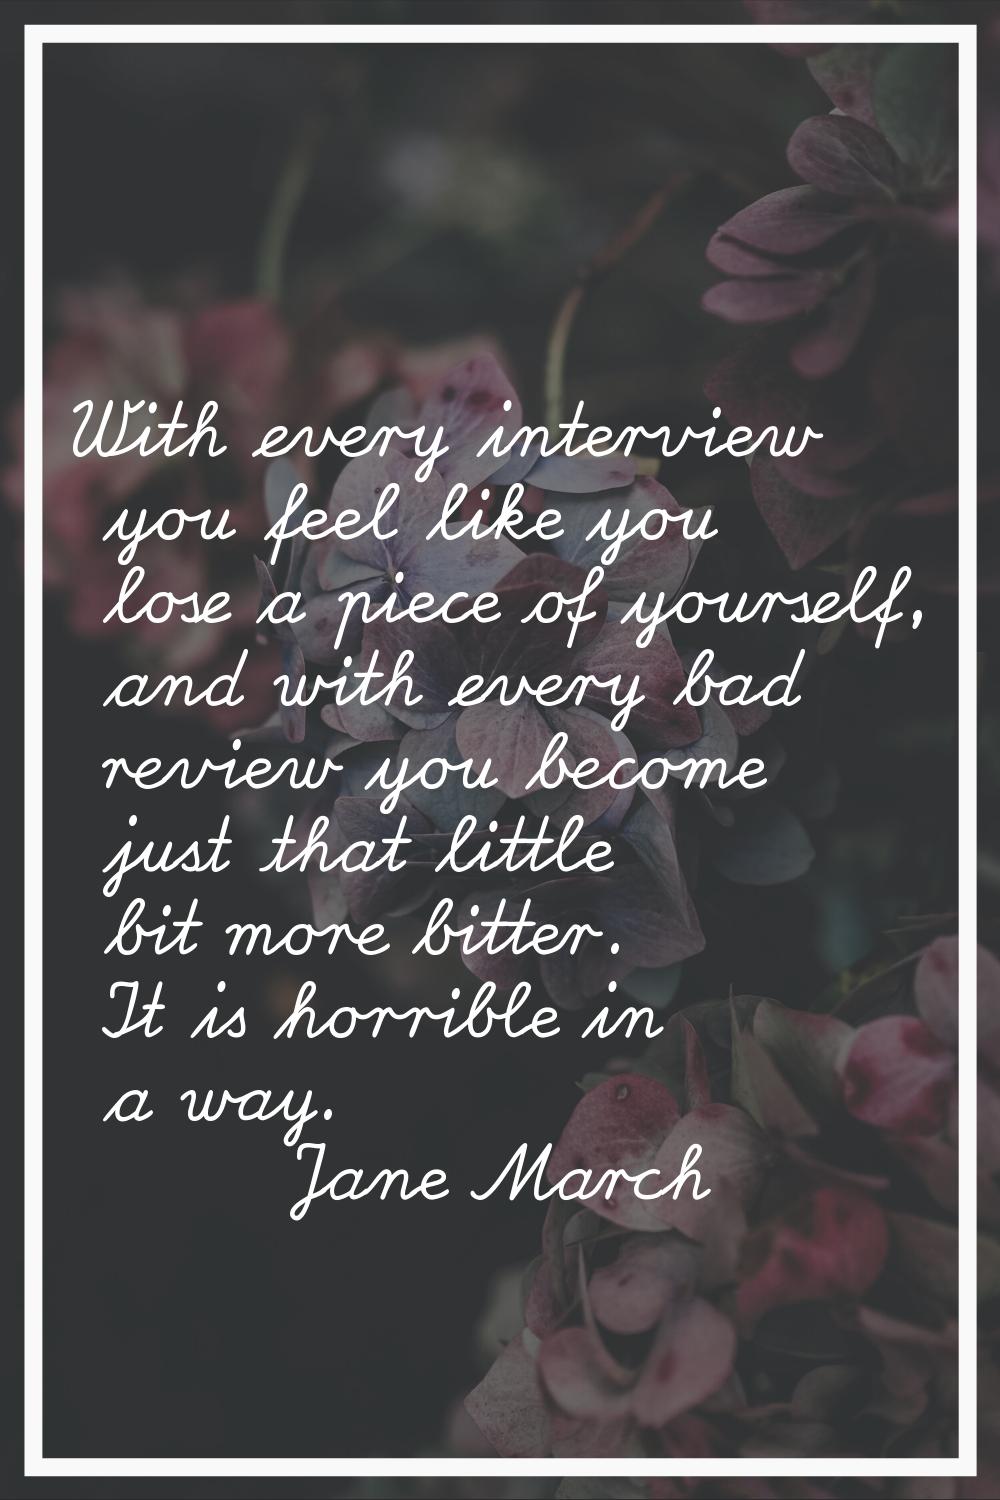 With every interview you feel like you lose a piece of yourself, and with every bad review you beco